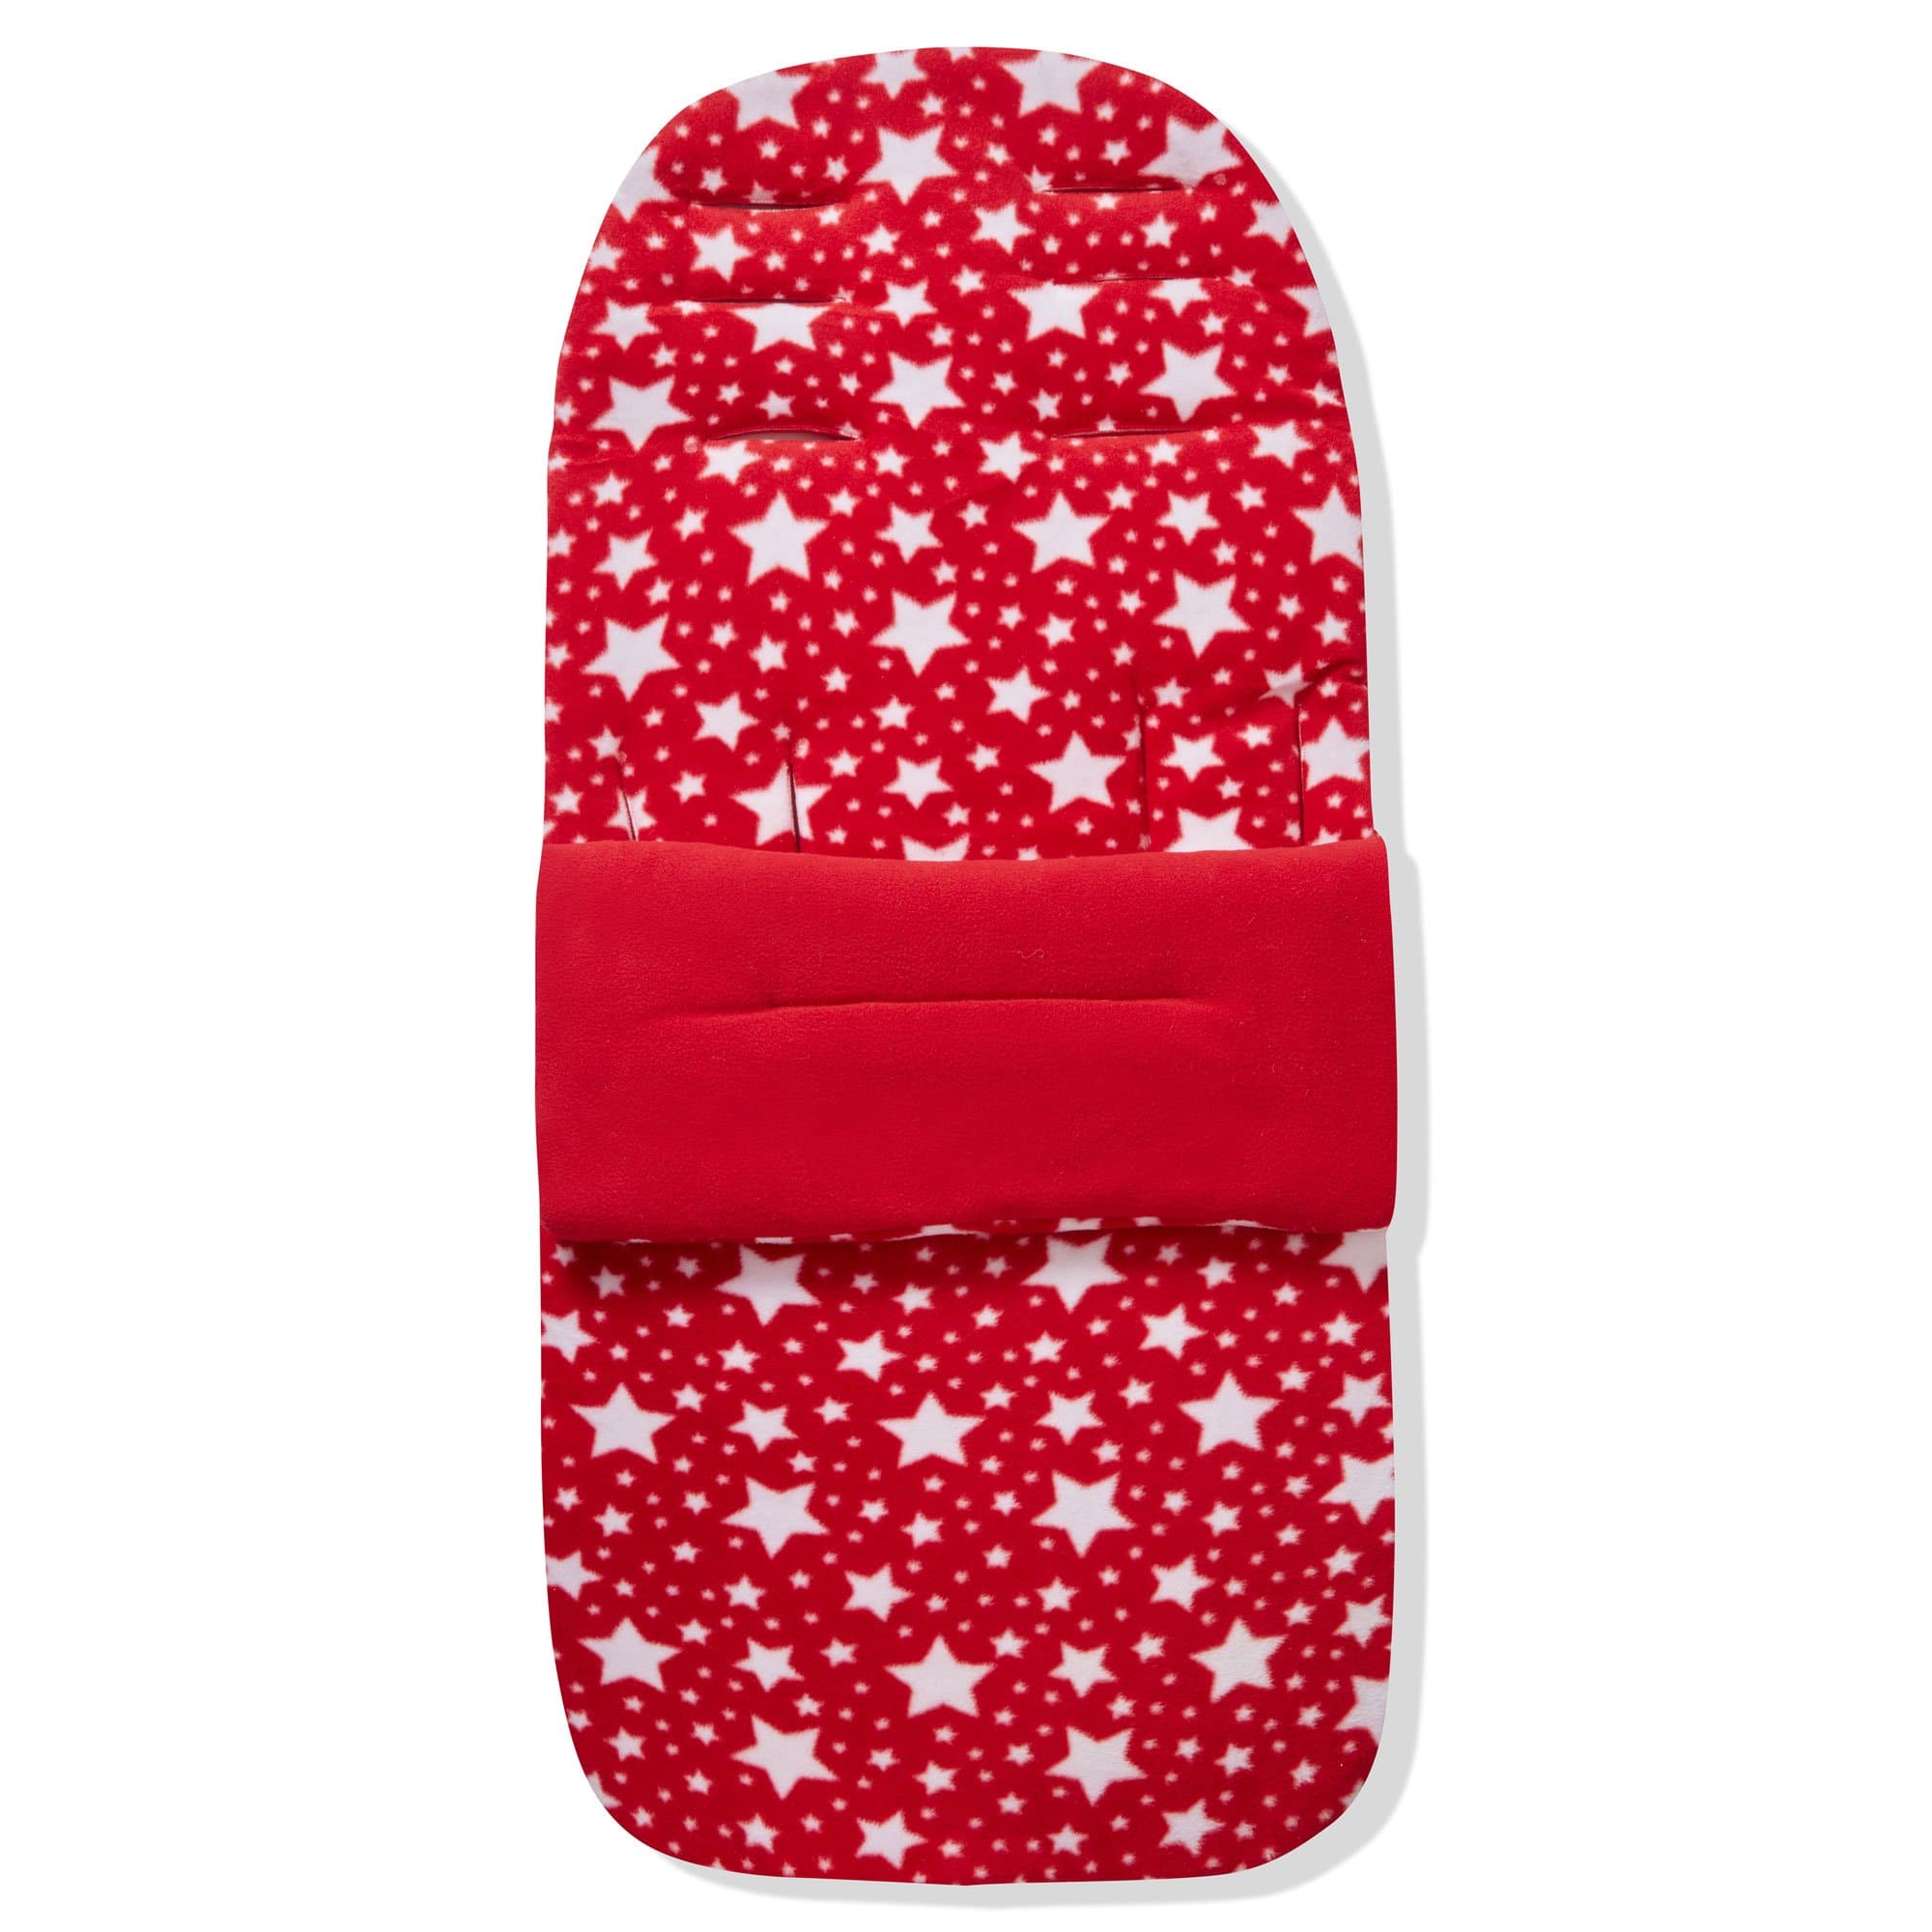 Fleece Footmuff / Cosy Toes Compatible with My Child - For Your Little One